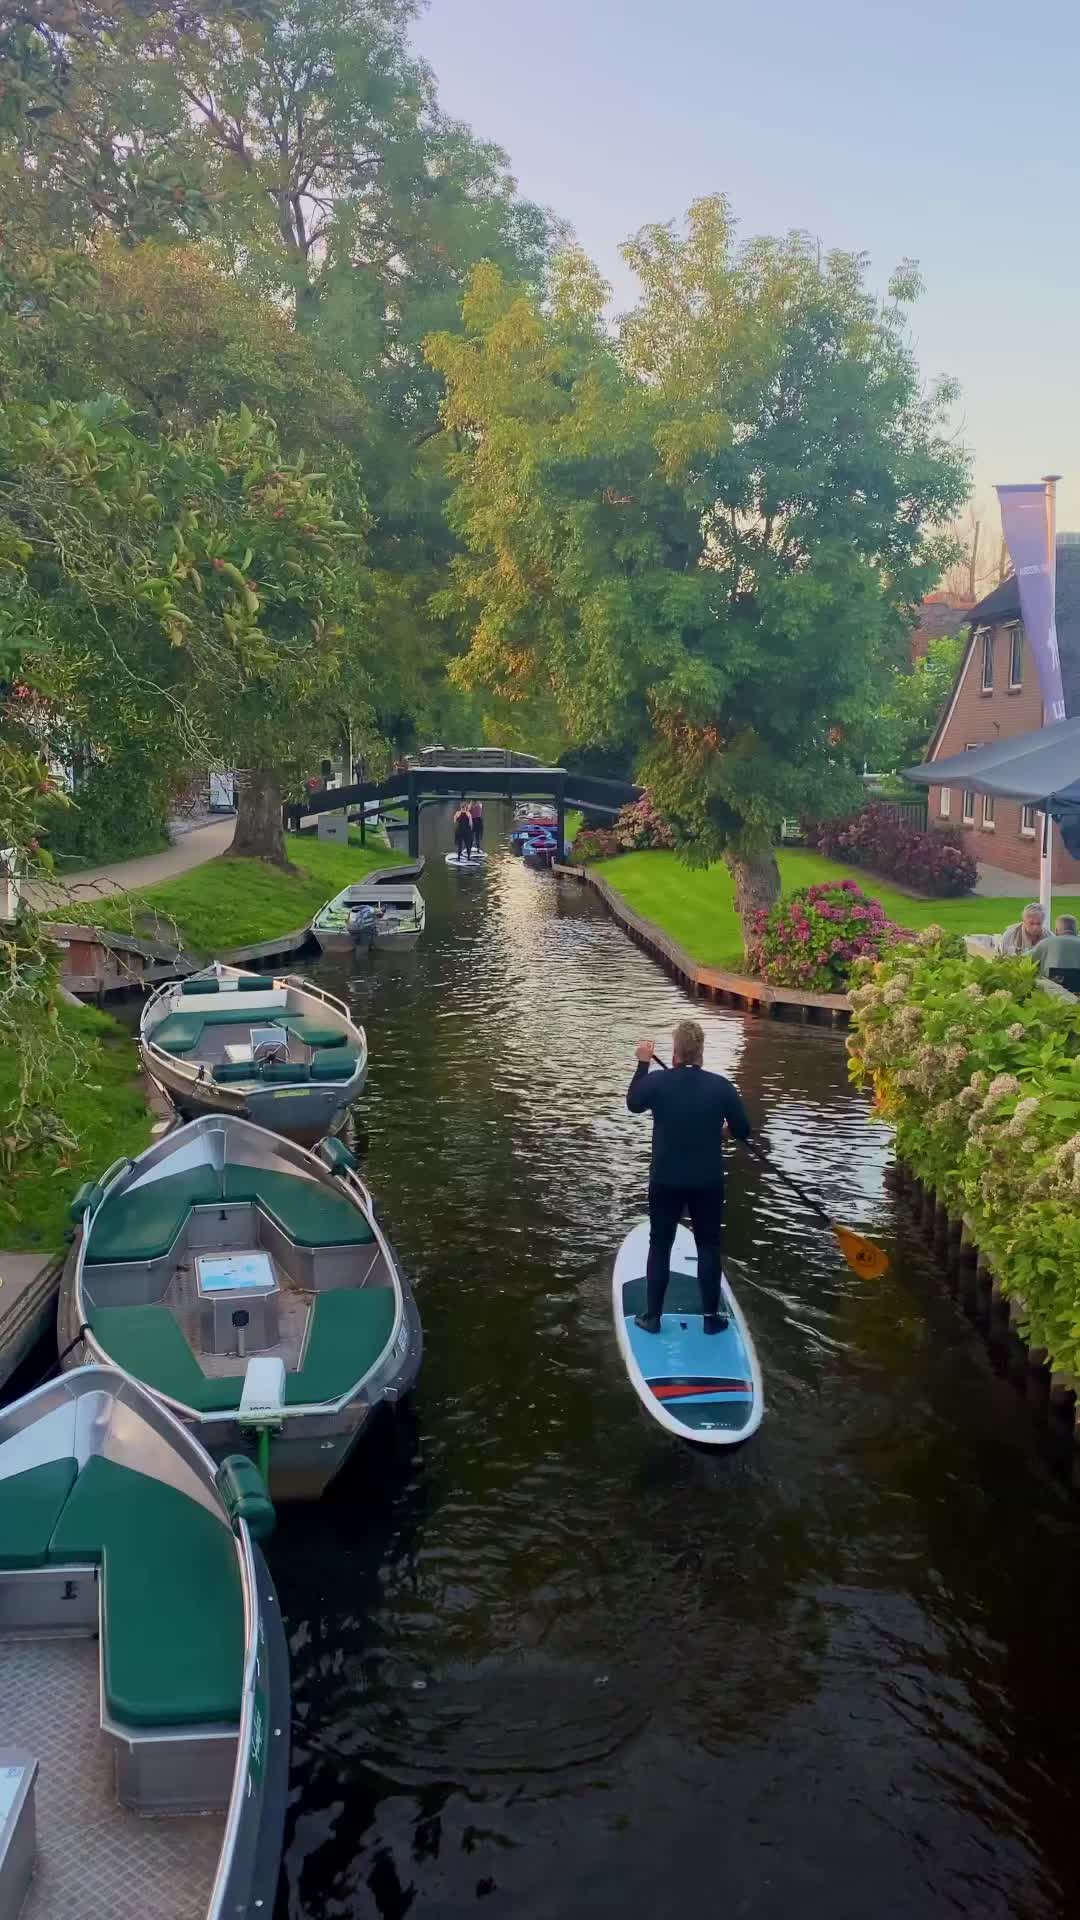 Supping the Canals of Giethoorn, Netherlands